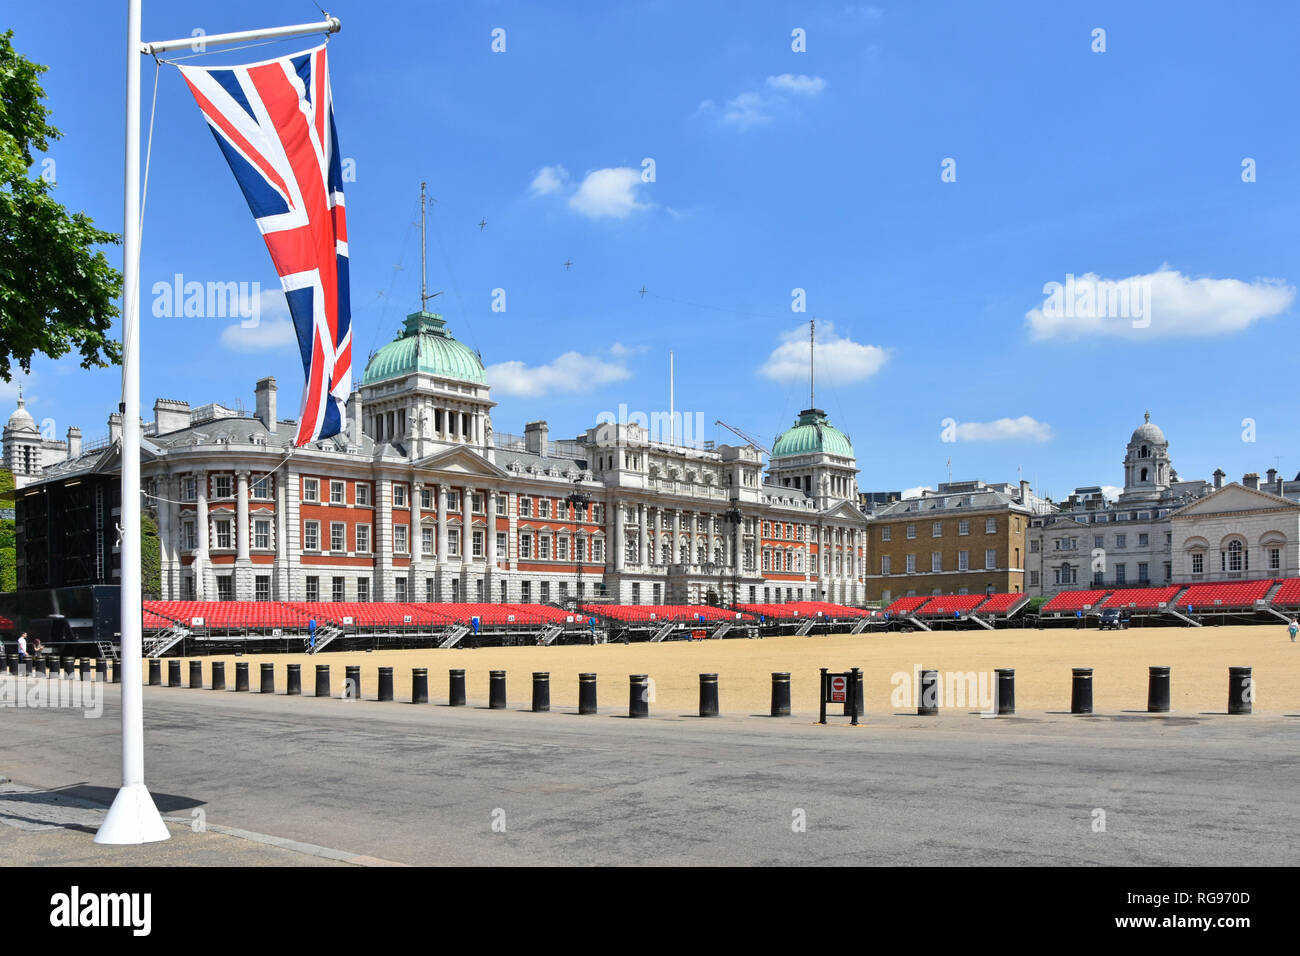 Security bollards protection on Horse Guards Parade Ground summer events & historic old building facades union jack flag in iconic London England UK Stock Photo